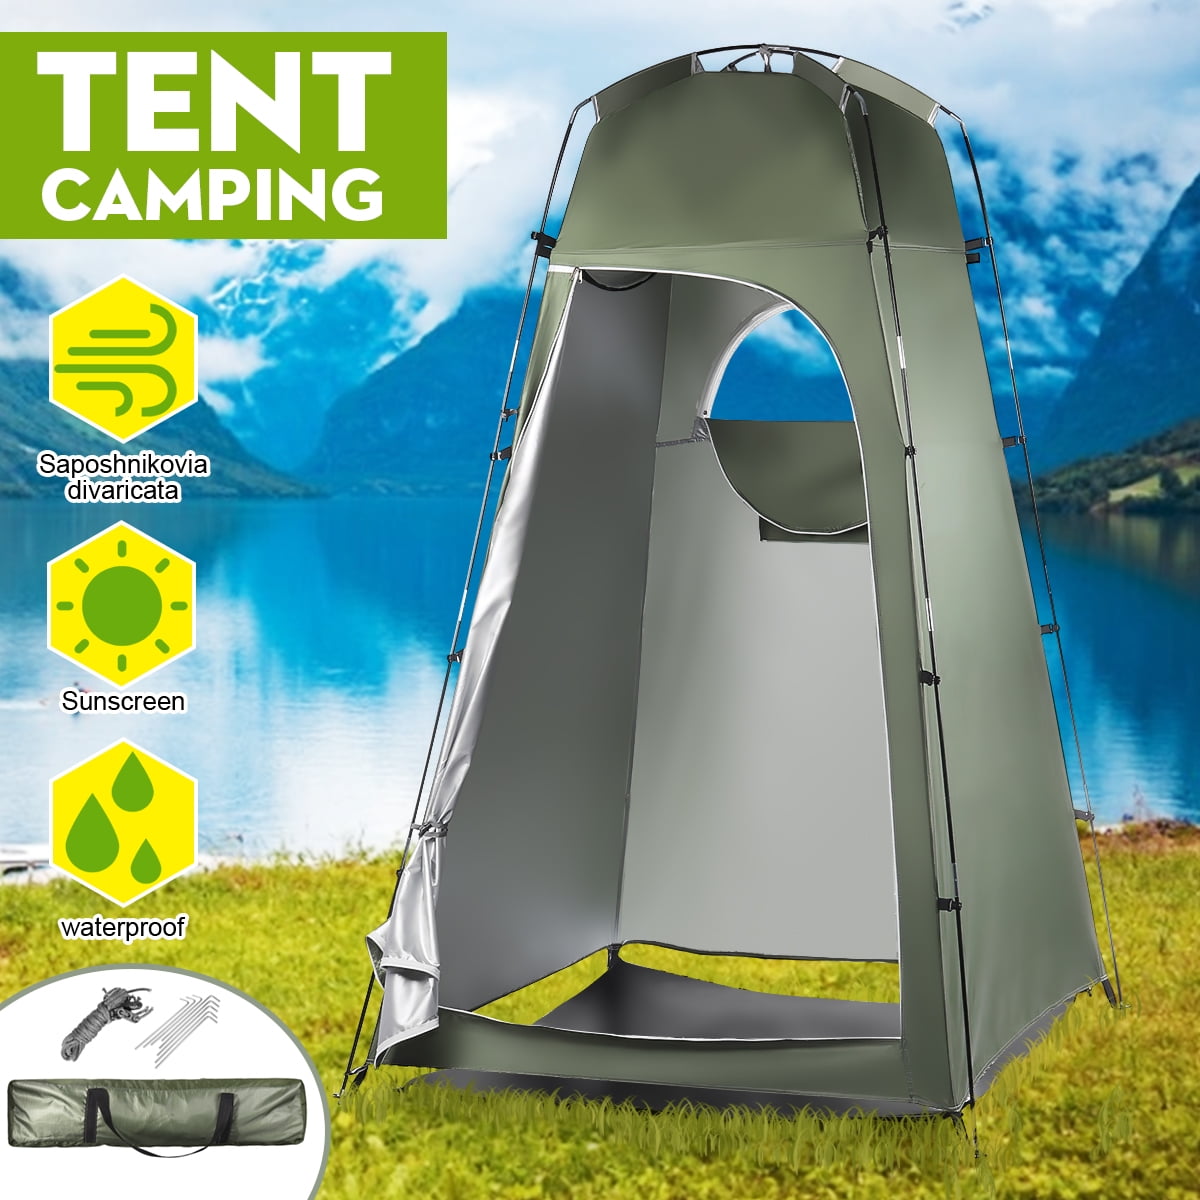 Rain Shelter for Camping & Beach Camp Toilet Lightweight & Sturdy Foldable Instant Portable Outdoor Shower Tent GigaTent Pop Up Pod Changing Room Privacy Tent Easy Set Up 